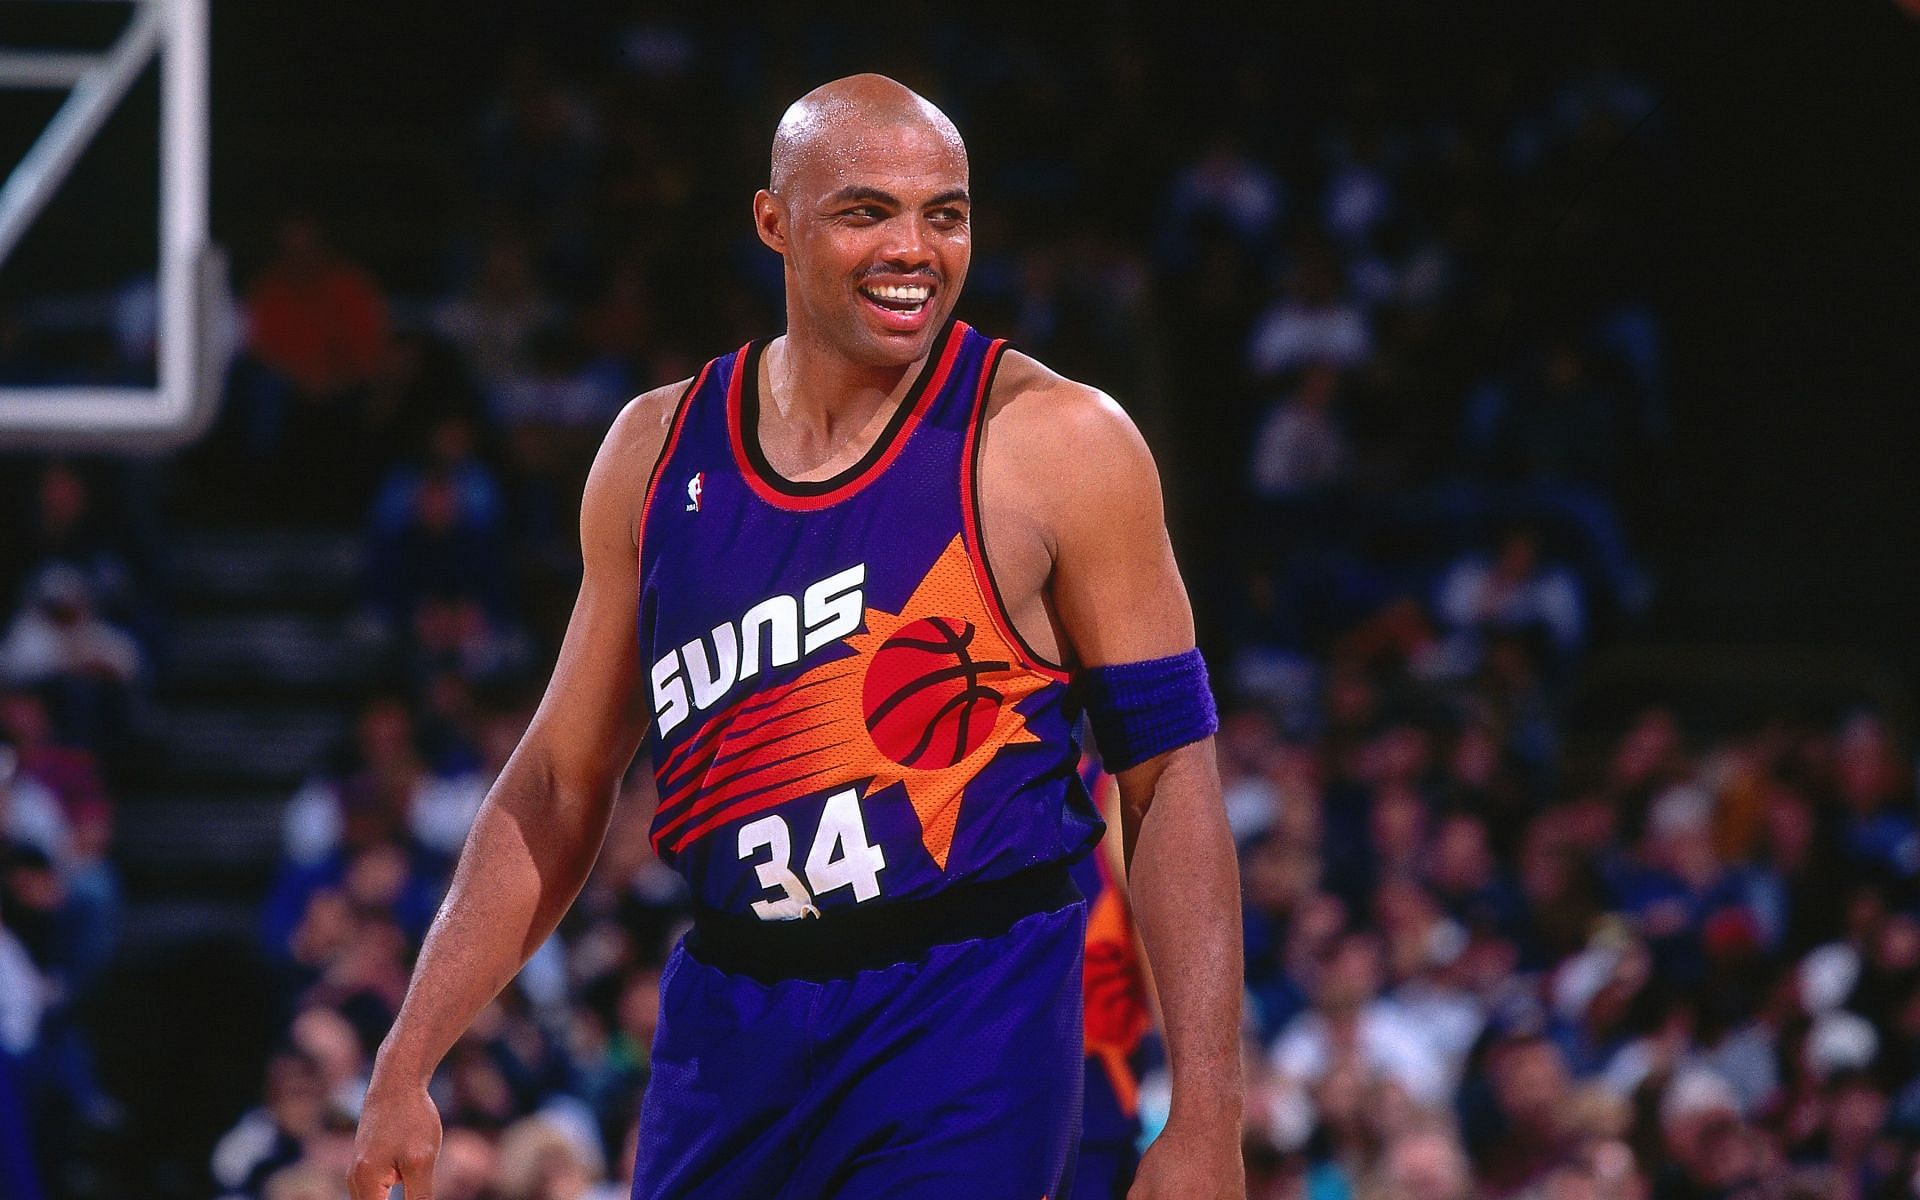 Suns Nation - It was a great year for Charles Barkley as